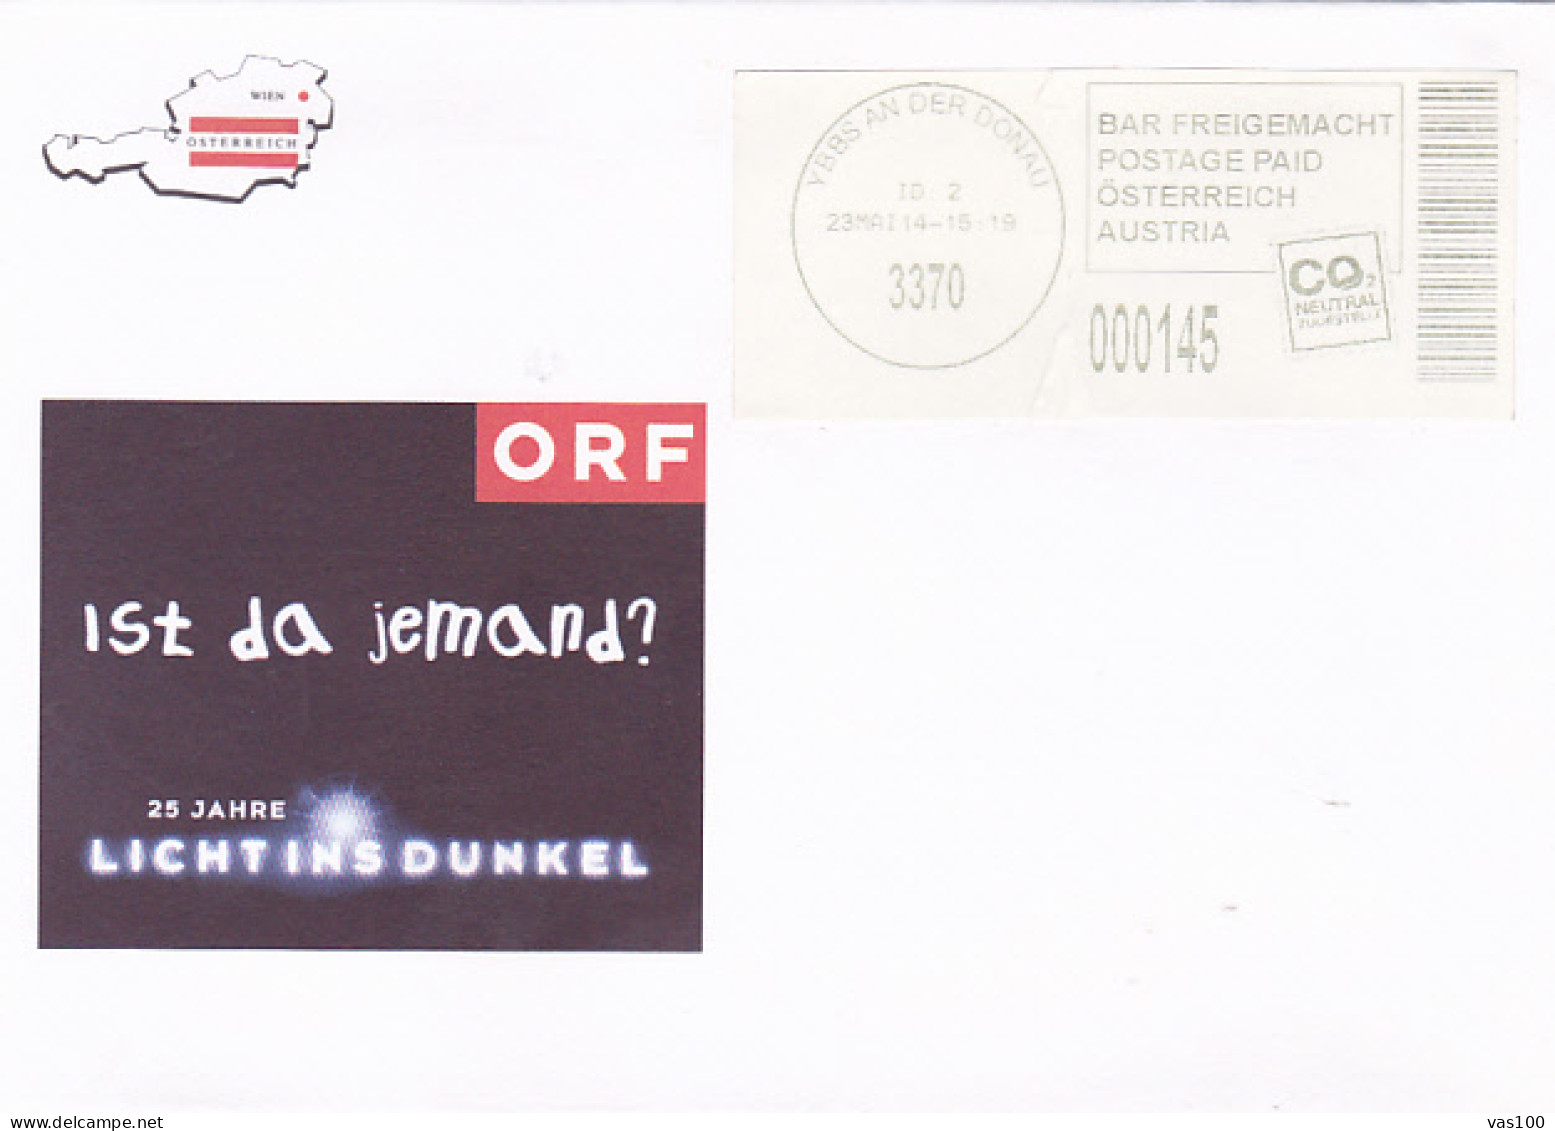 LIGHT IN THE DARK TELETHON ADVERTISING, POSTAGE PAID SPECIAL COVER, 2014, AUSTRIA - Storia Postale